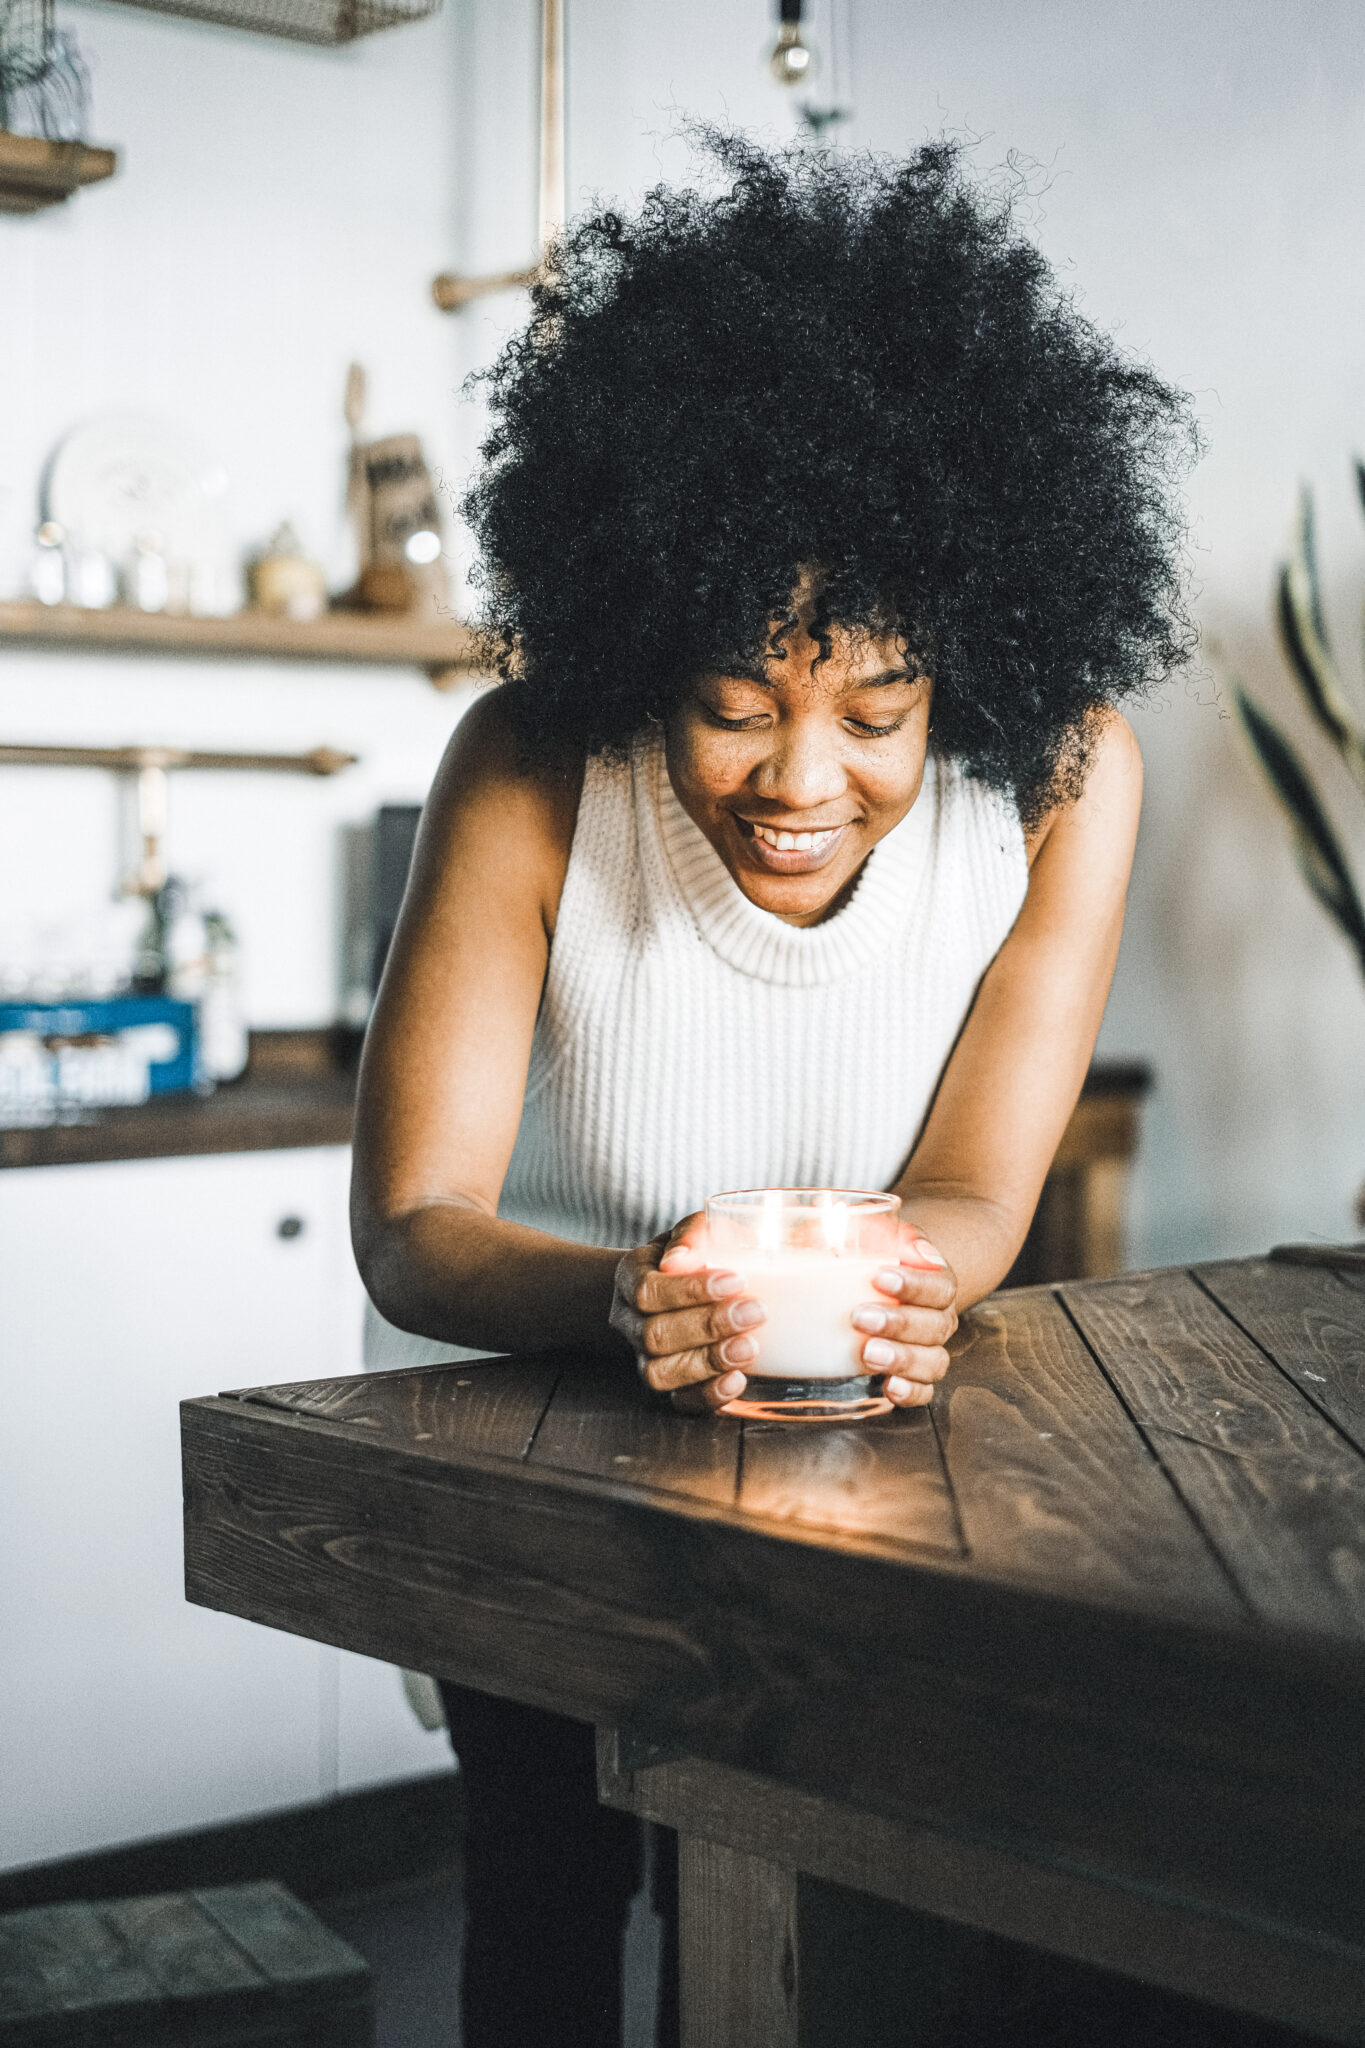 Woman holds a lit candle in the kitchen table. She smiles and is happy. This article covers ways to feel happier in your home.